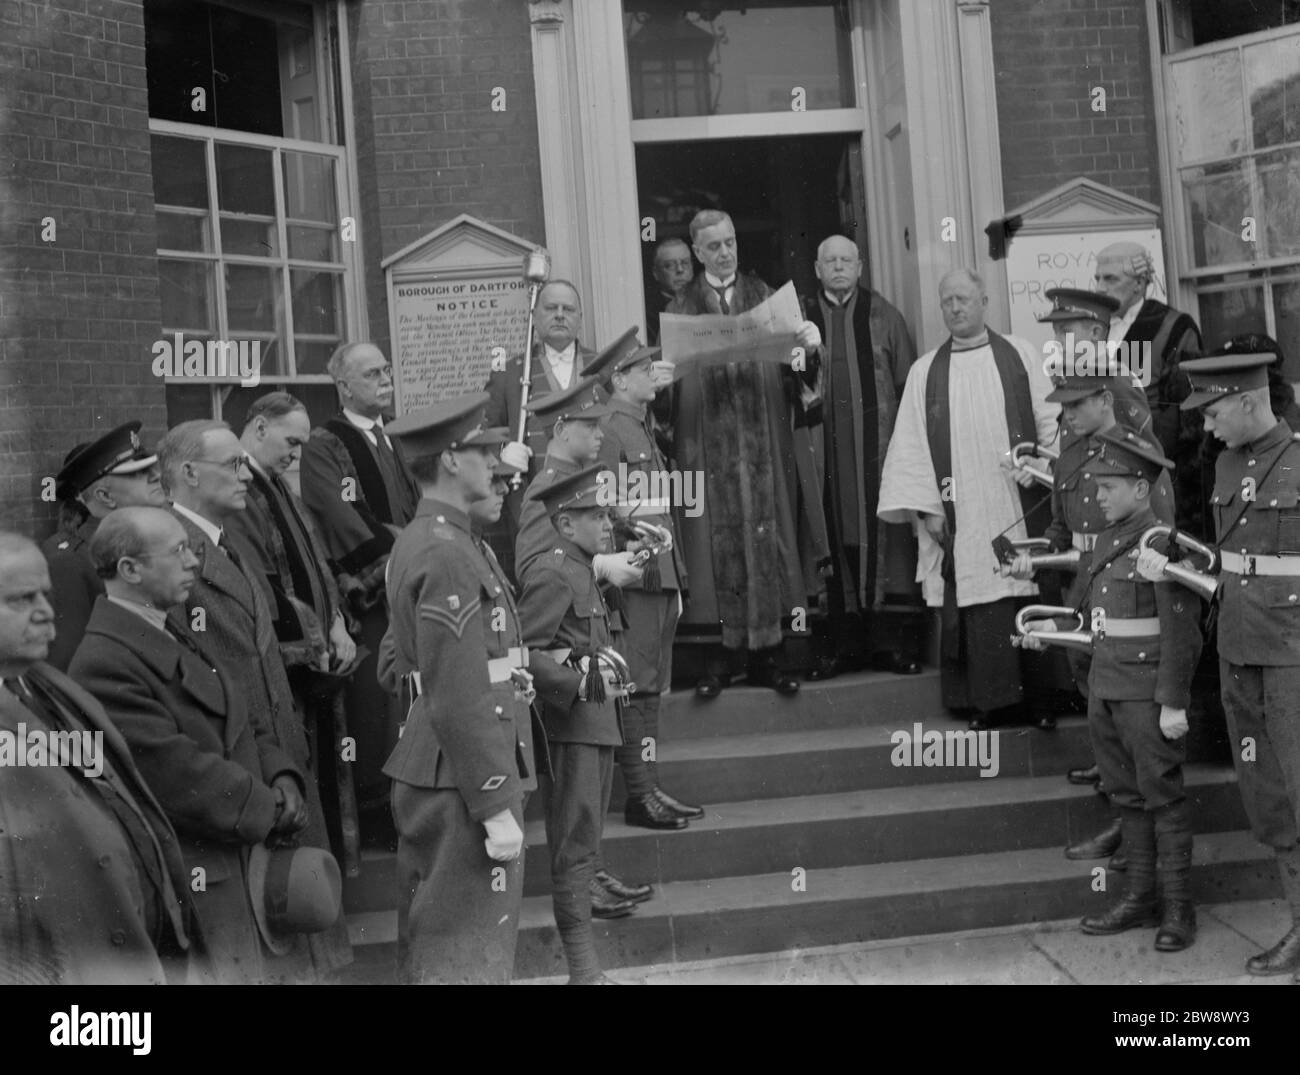 Announcing the new King in Dartford . The royal proclamation of the accession of Edward VIII is read out in Dartford , Kent . 1936 Stock Photo